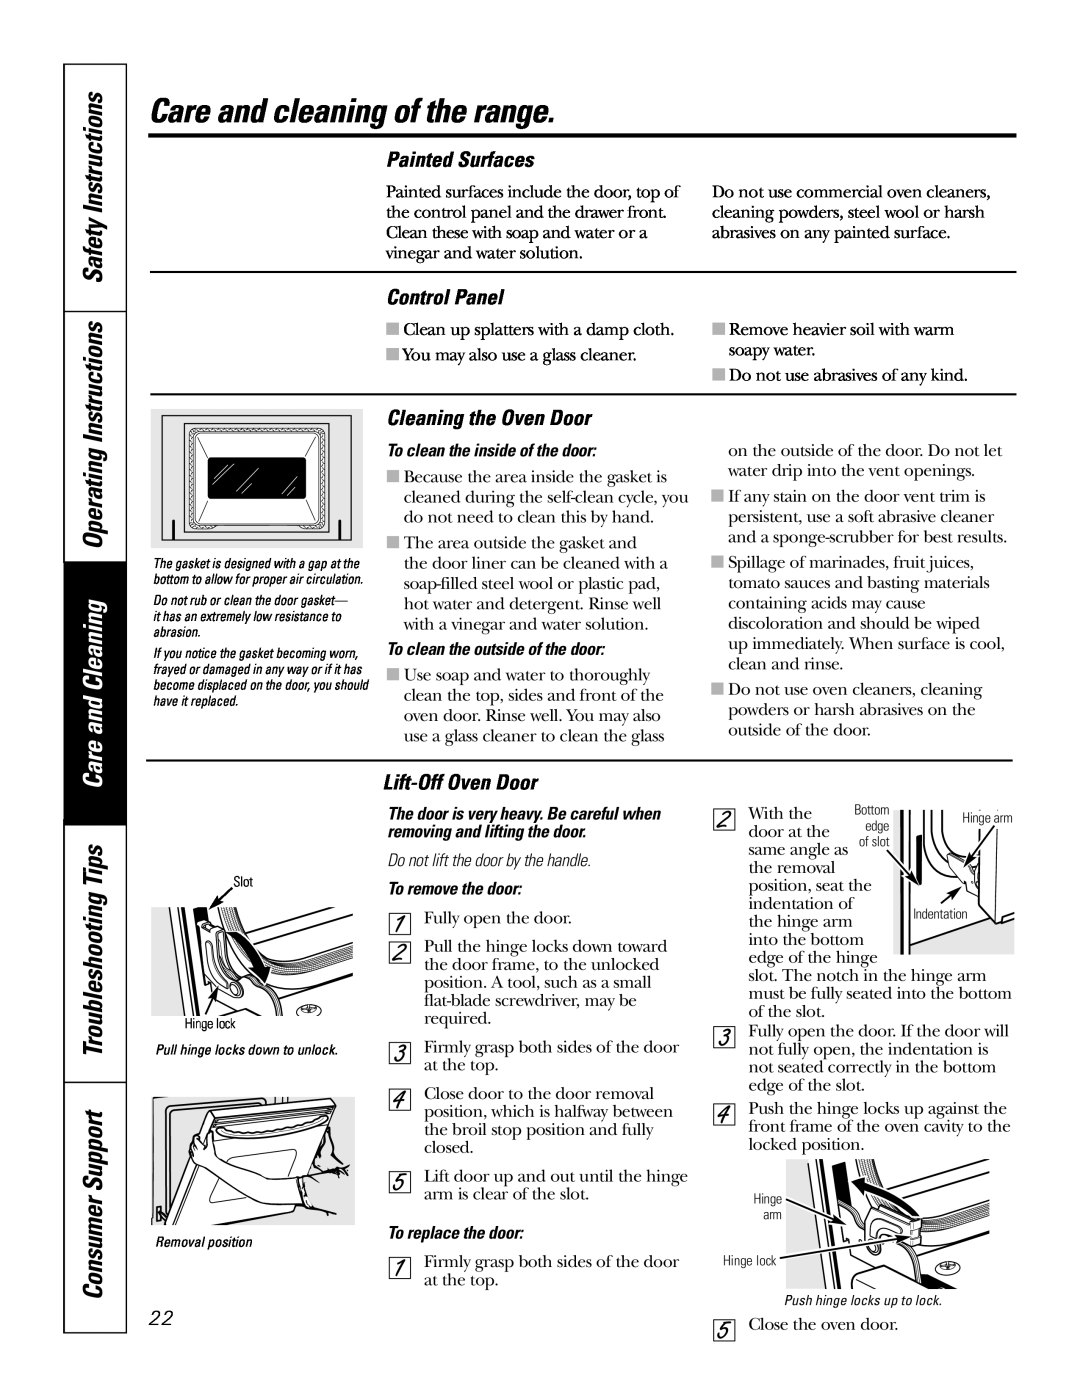 GE JDP47 Instructions Safety Instructions, Painted Surfaces, Control Panel, Cleaning the Oven Door, Lift-Off Oven Door 